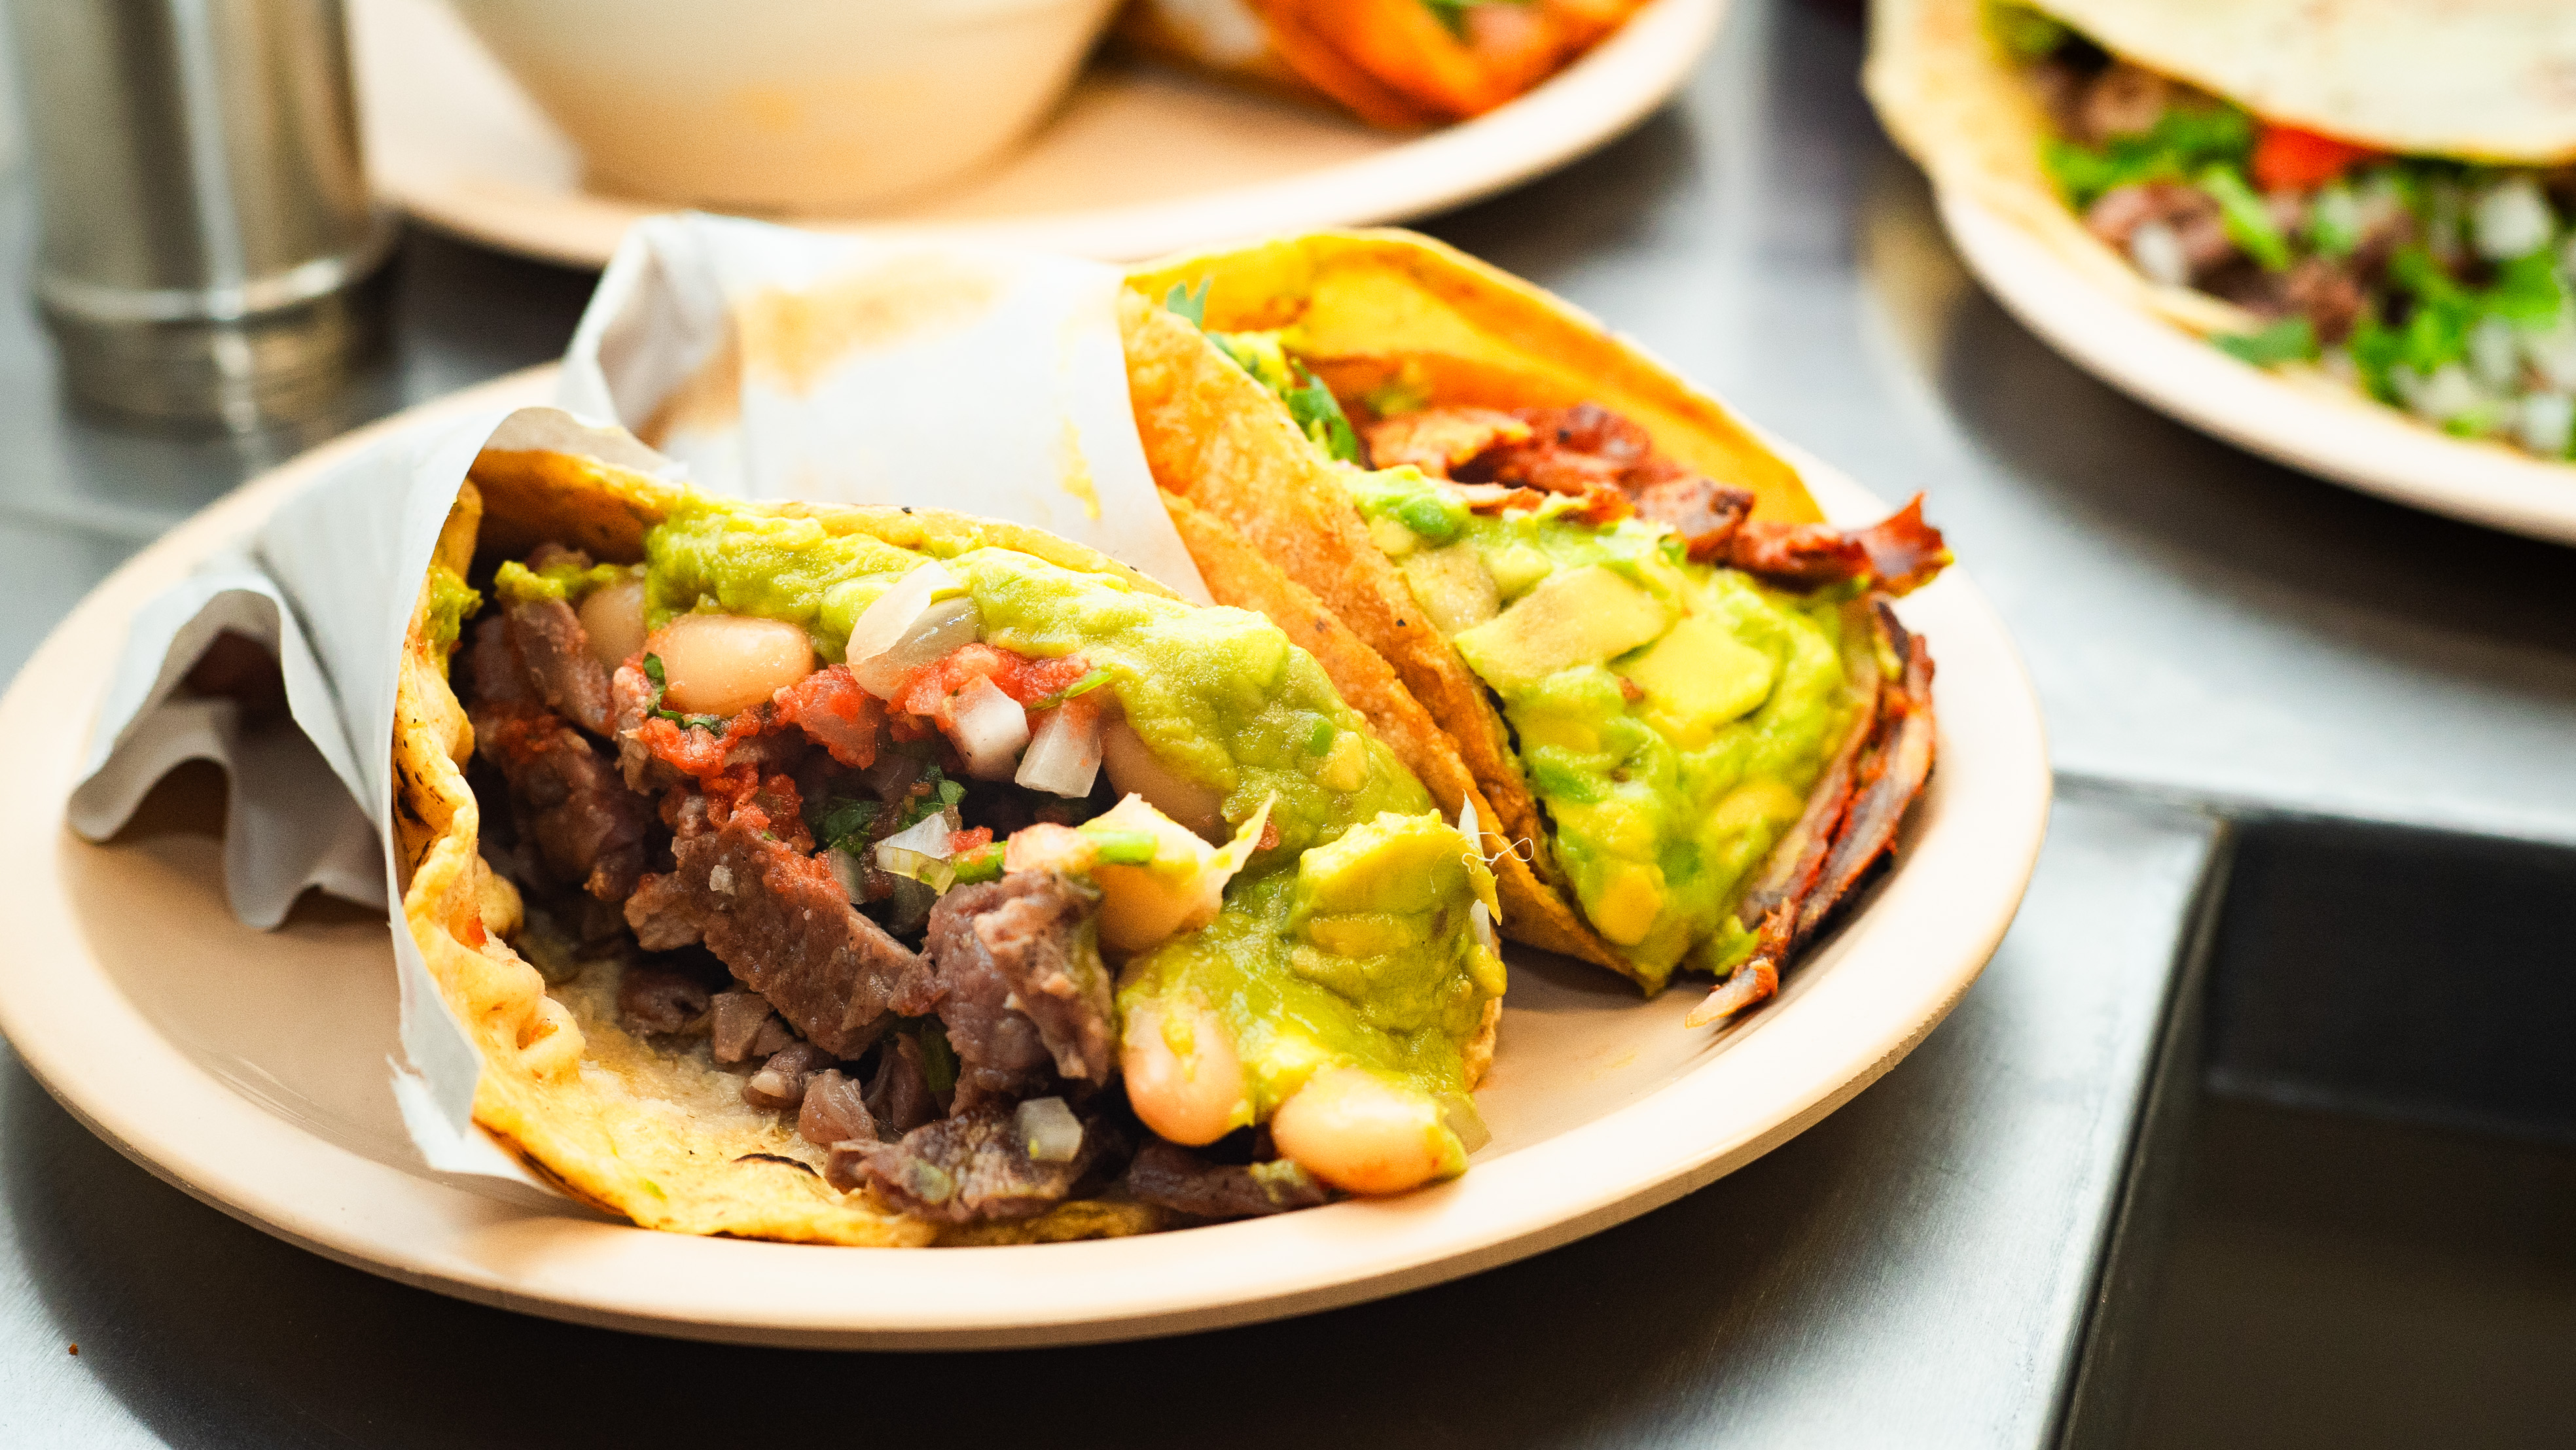 Two tacos overflowing with meat and guacamole.